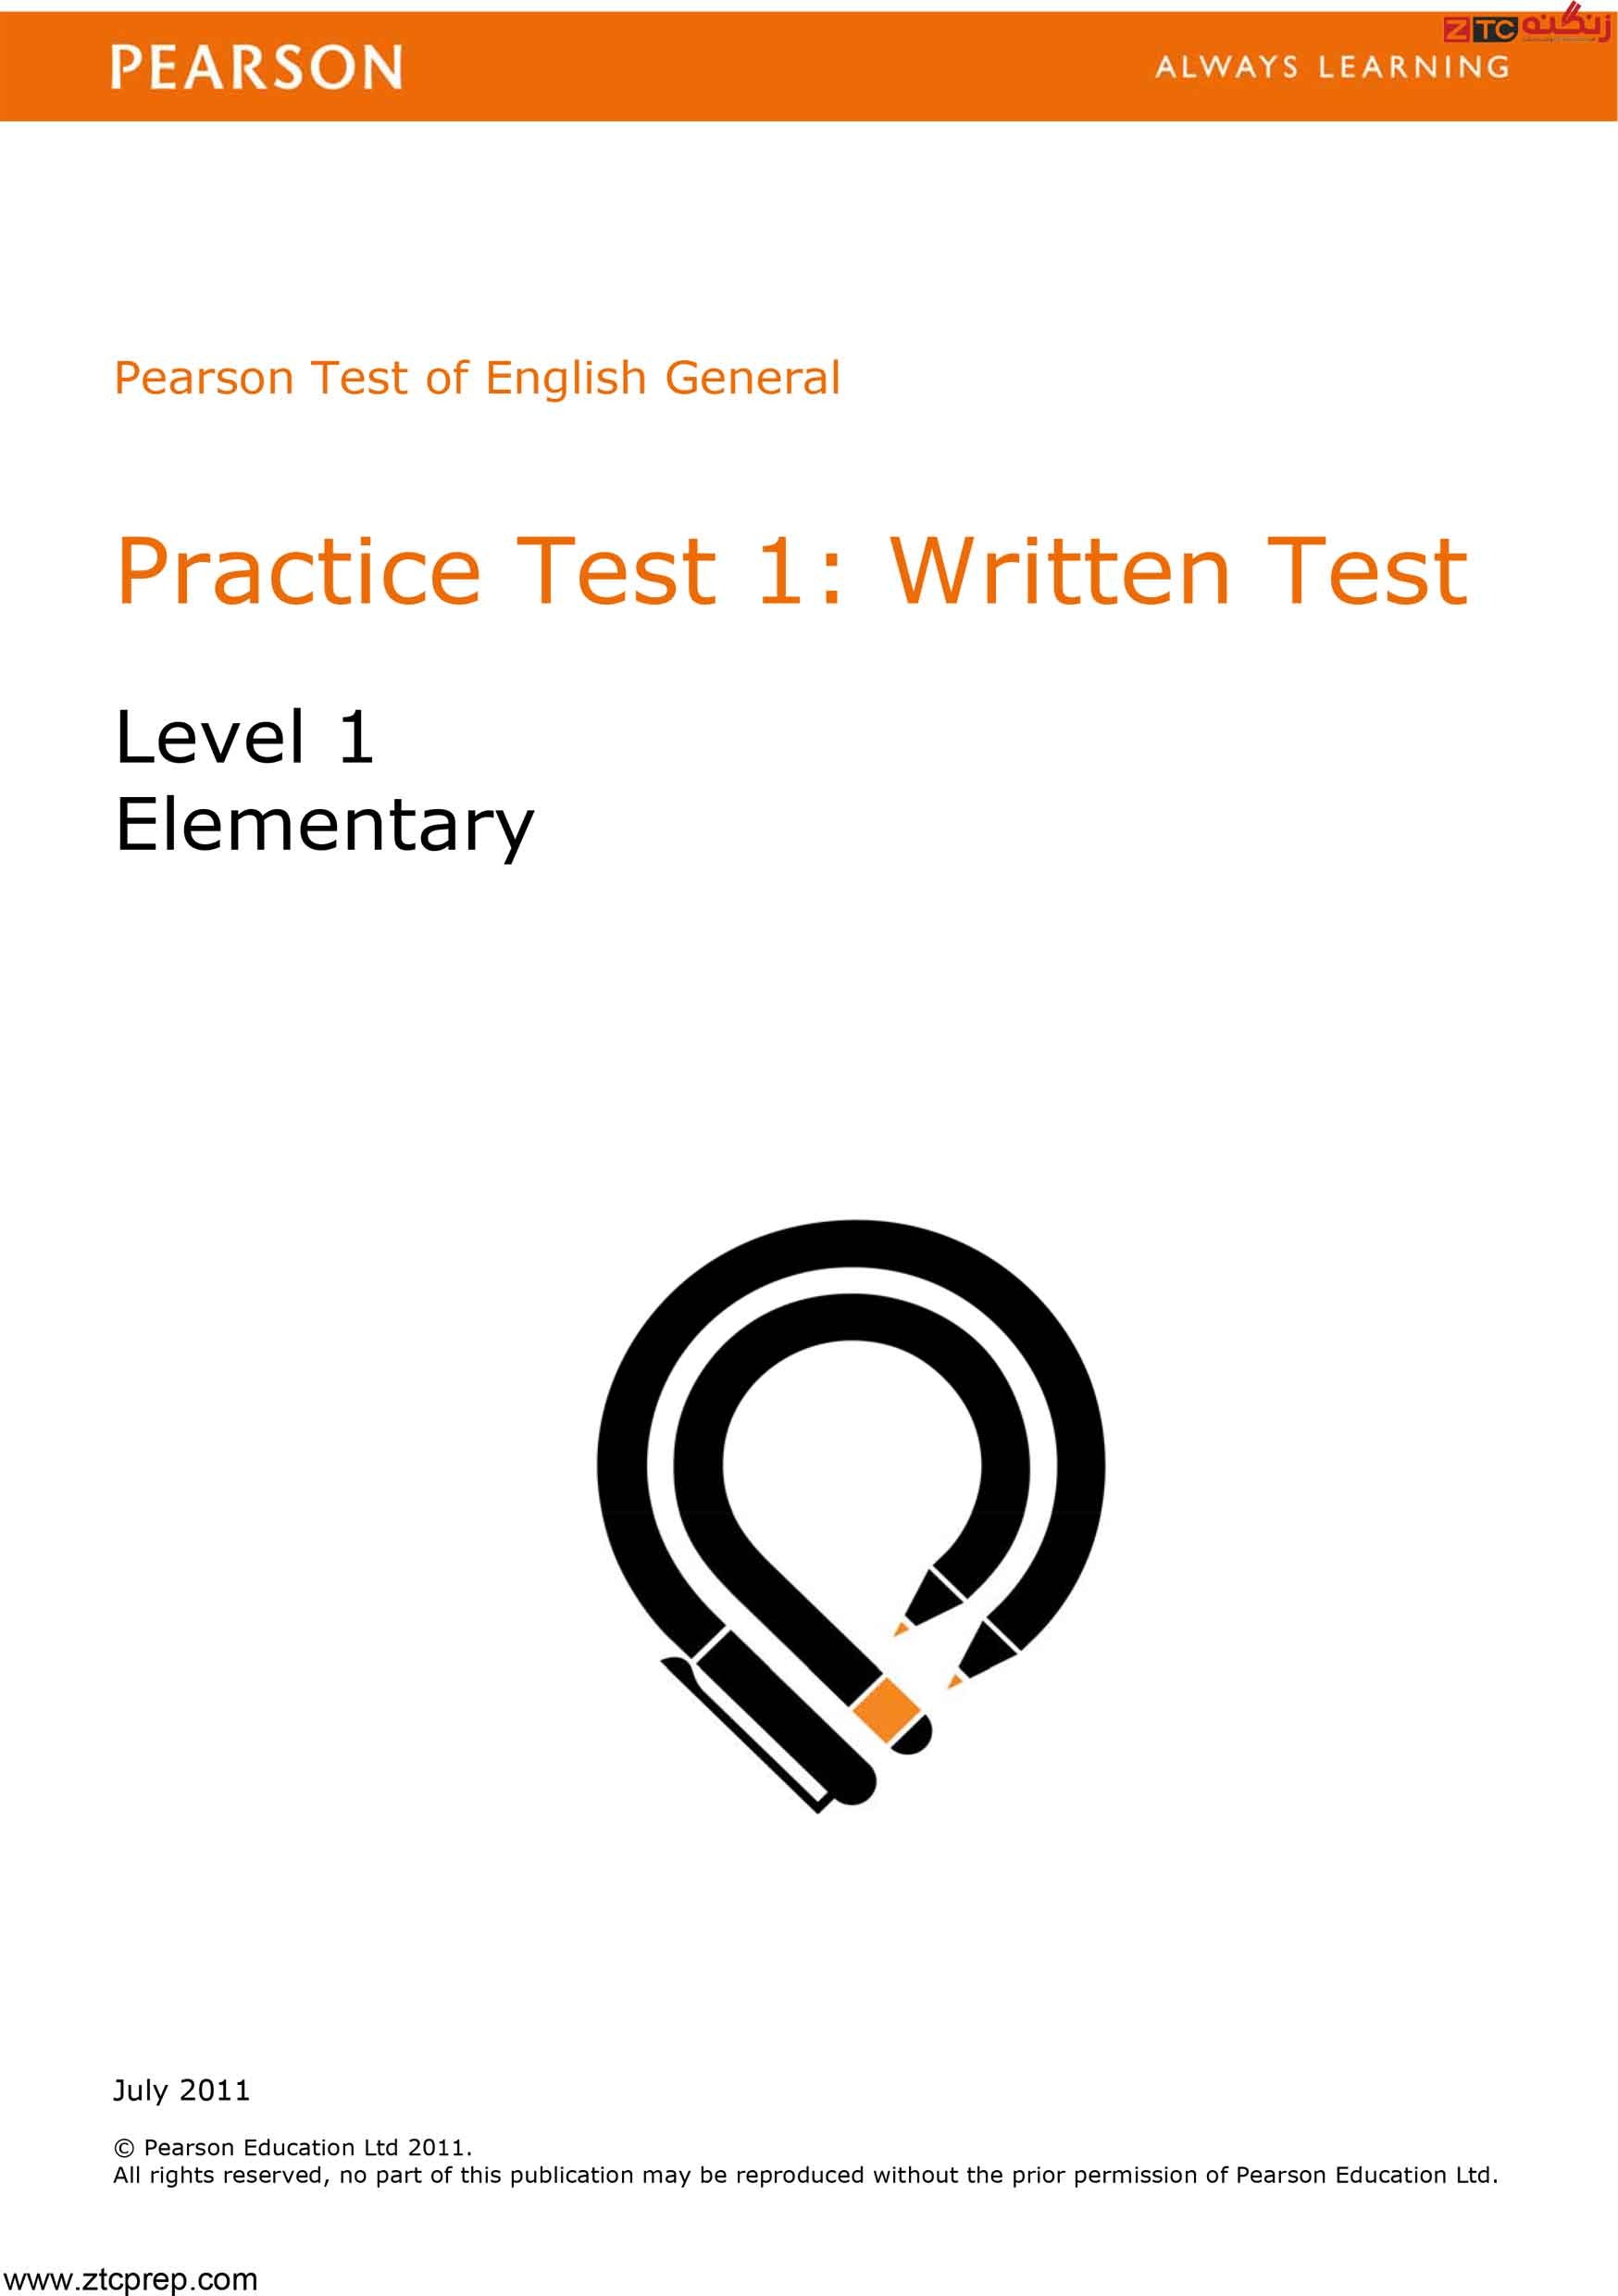 PTE General Practice Test 1  Level 1 Elementary